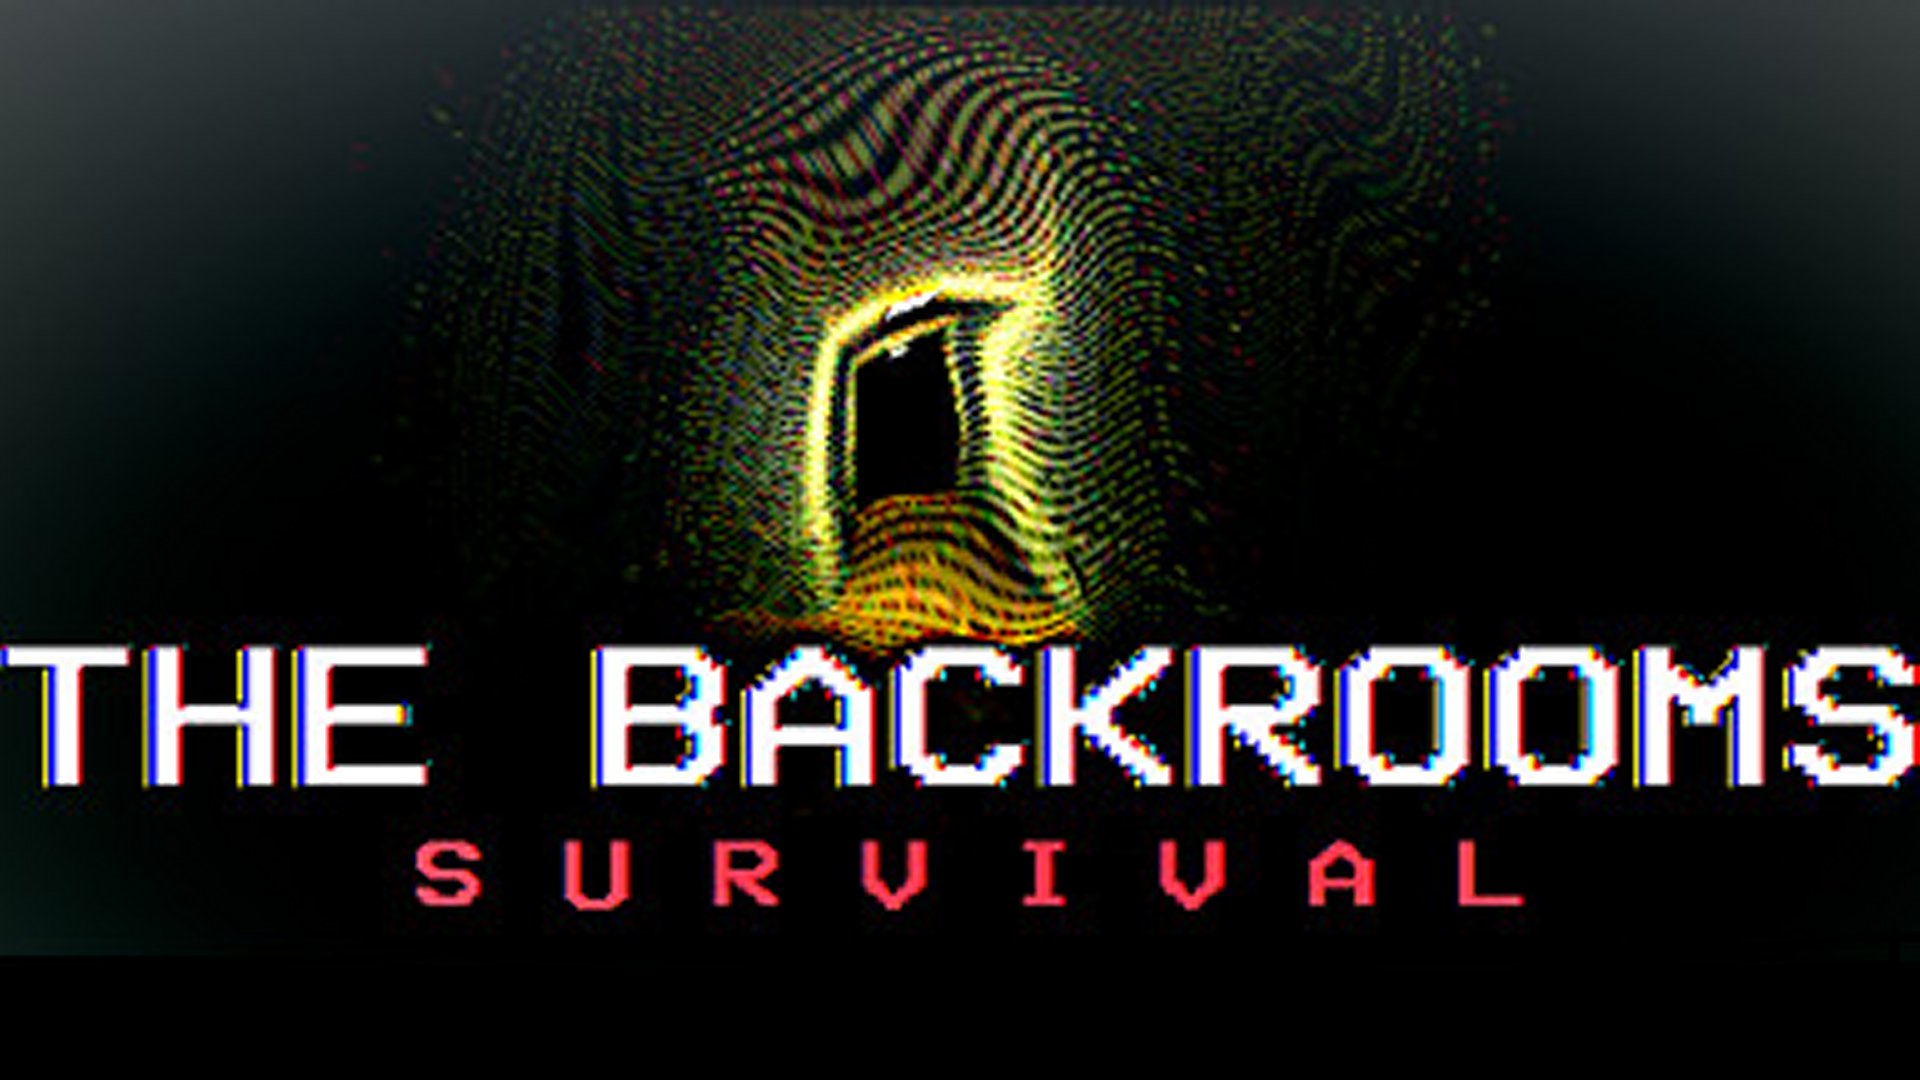 I'm creating a version of the backrooms with only the best 100 levels. Top  3 comments will be added to the list! : r/backrooms